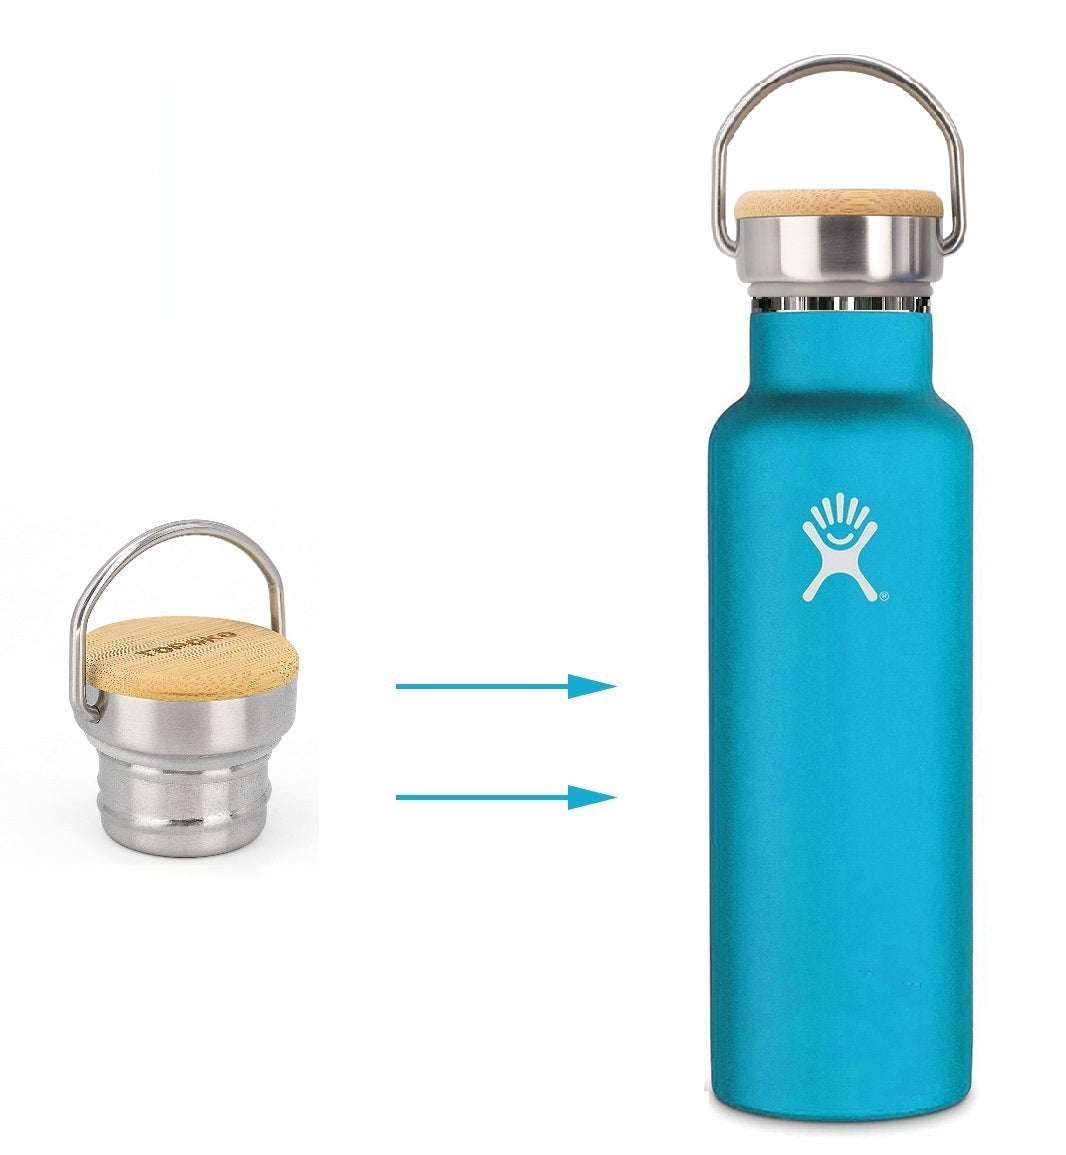 Replacement Lid for Standard Mouth Water Bottle Vacuum Insulated